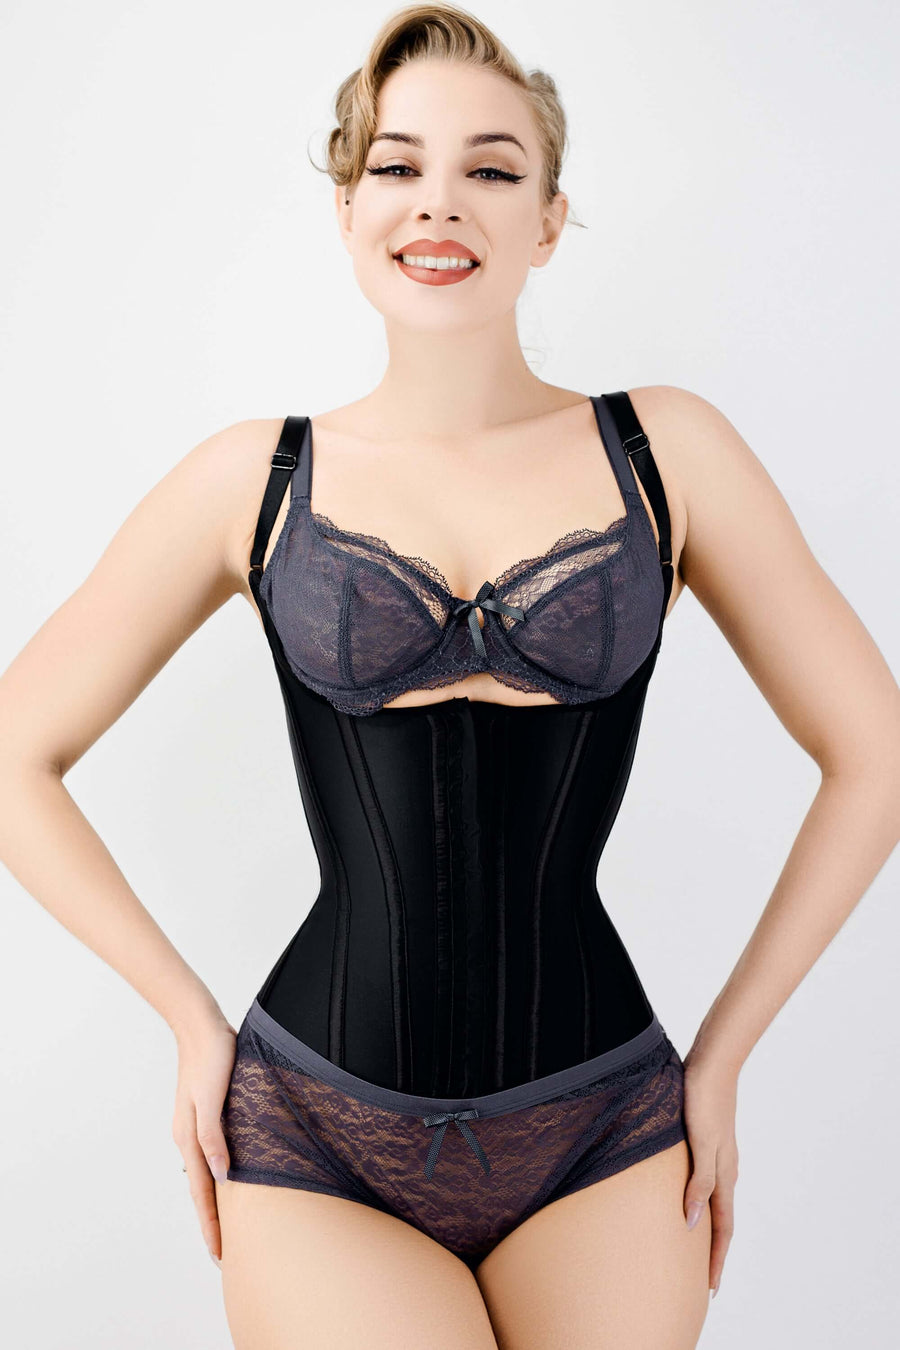 BEST corset to get a cinched waist appearance?? : r/corsets